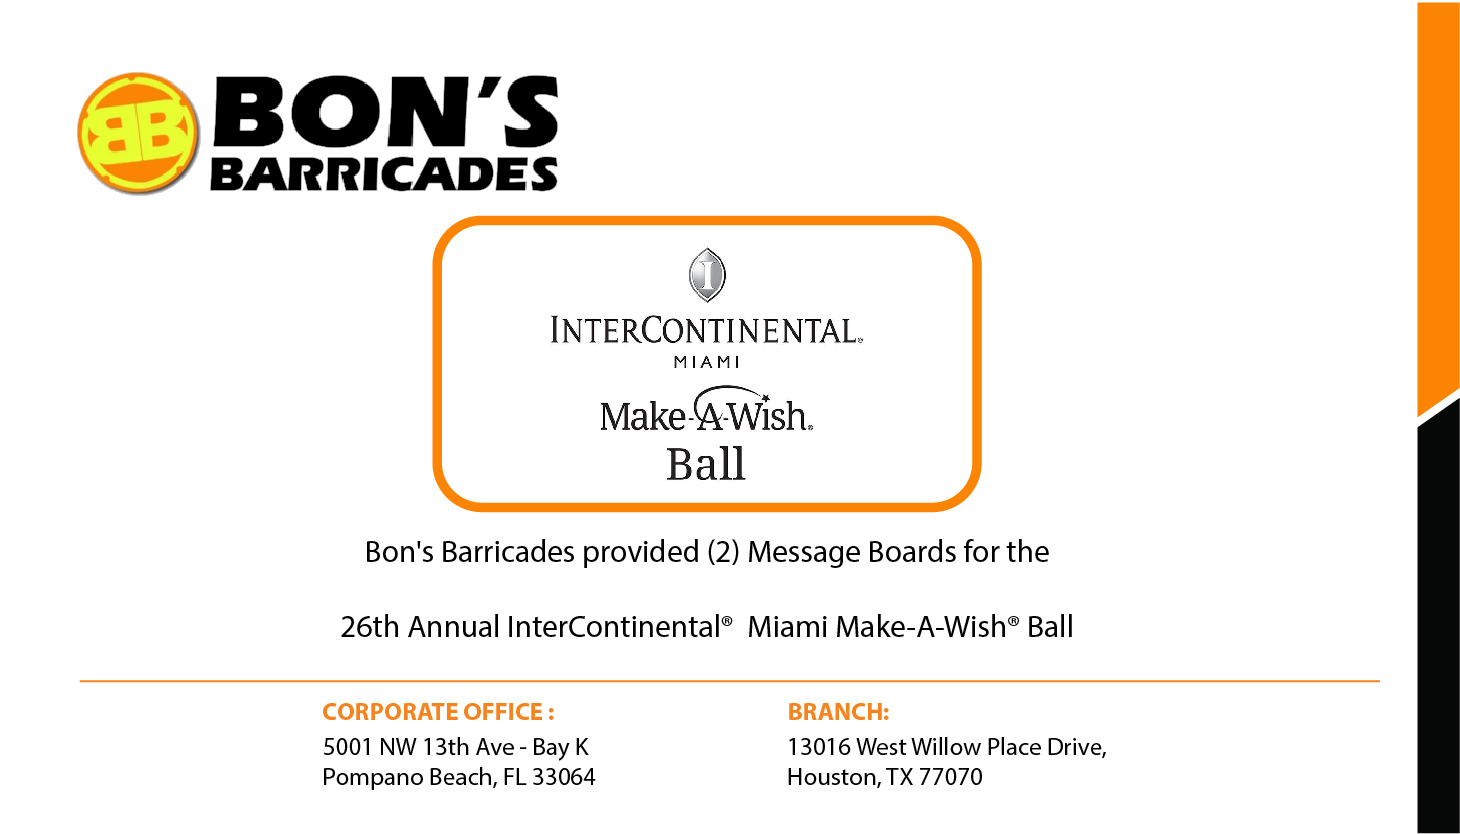 Post about how Bon’s Barricades provided message boards for the 26th Annual Intercontinental Miami Make-A-Wish Ball